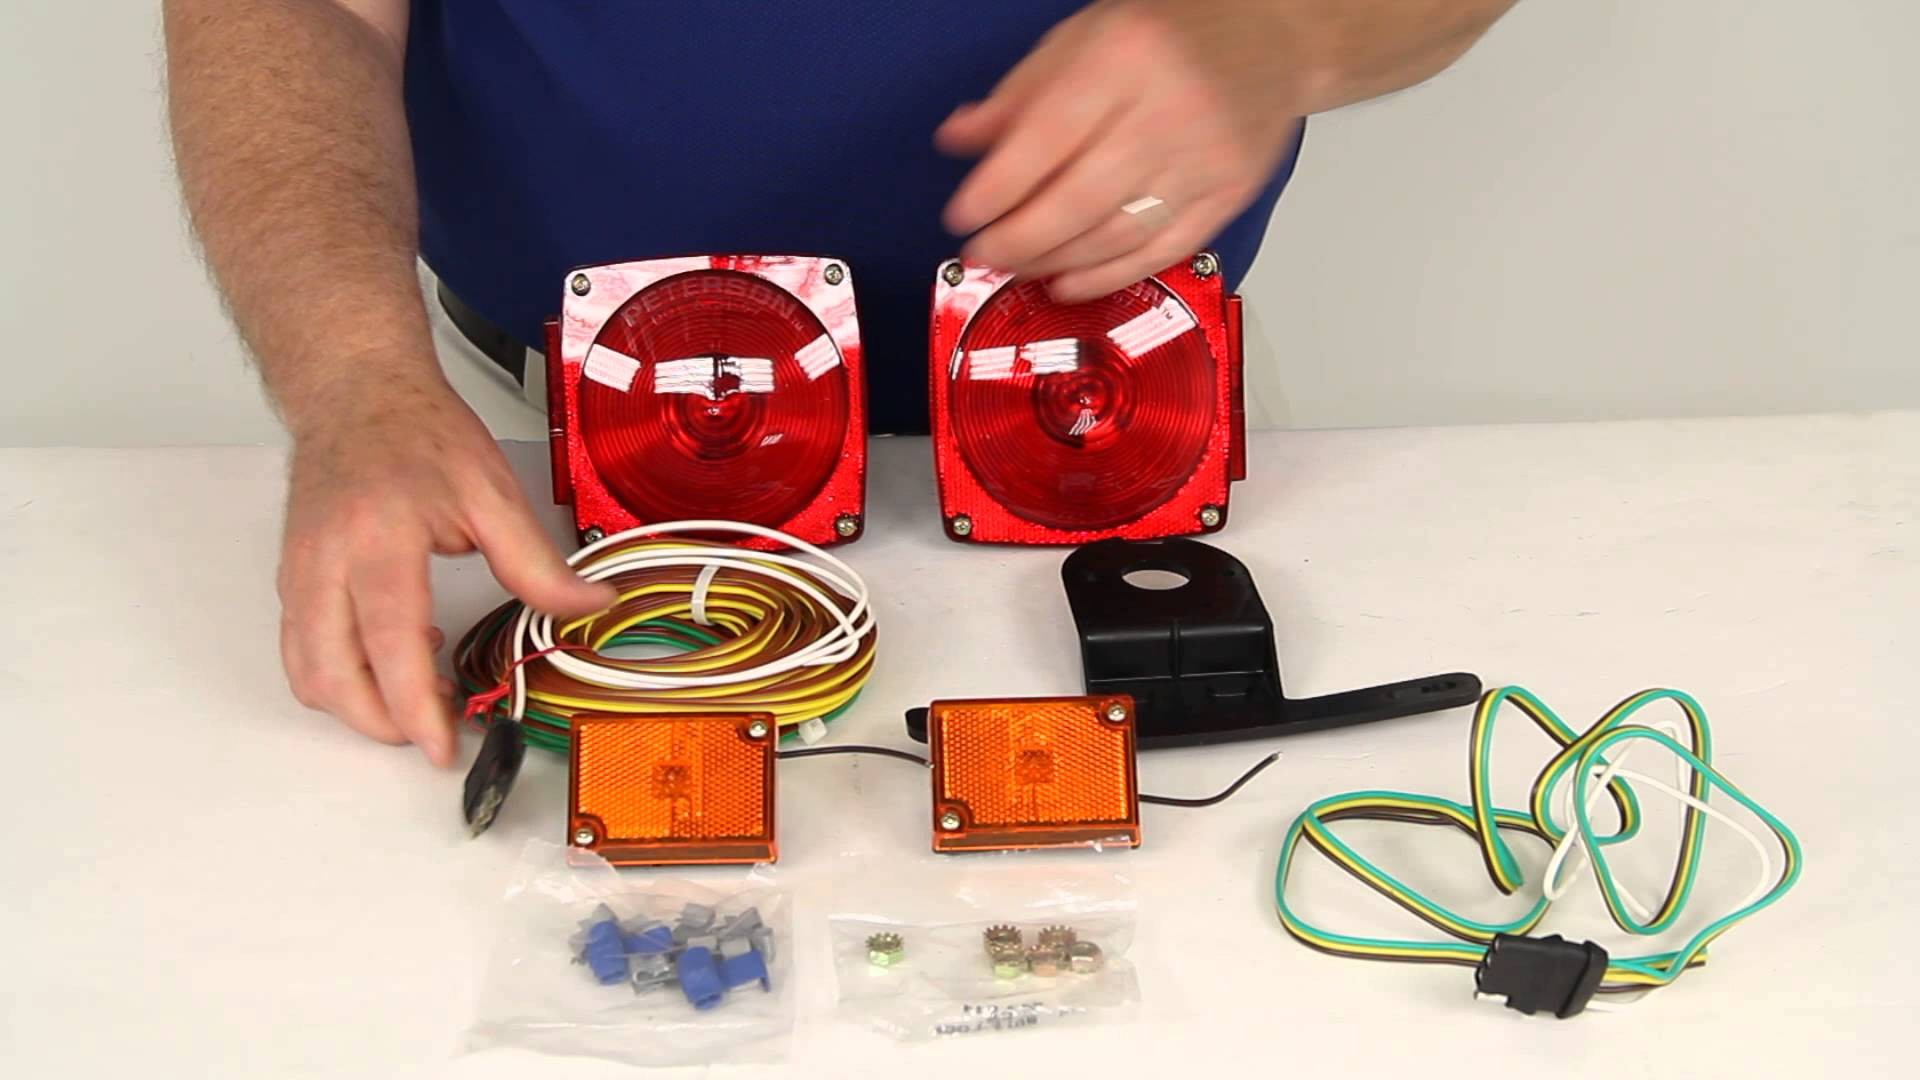 Review Peterson Trailer Lights Etrailer Review Wiring Harness Full Size